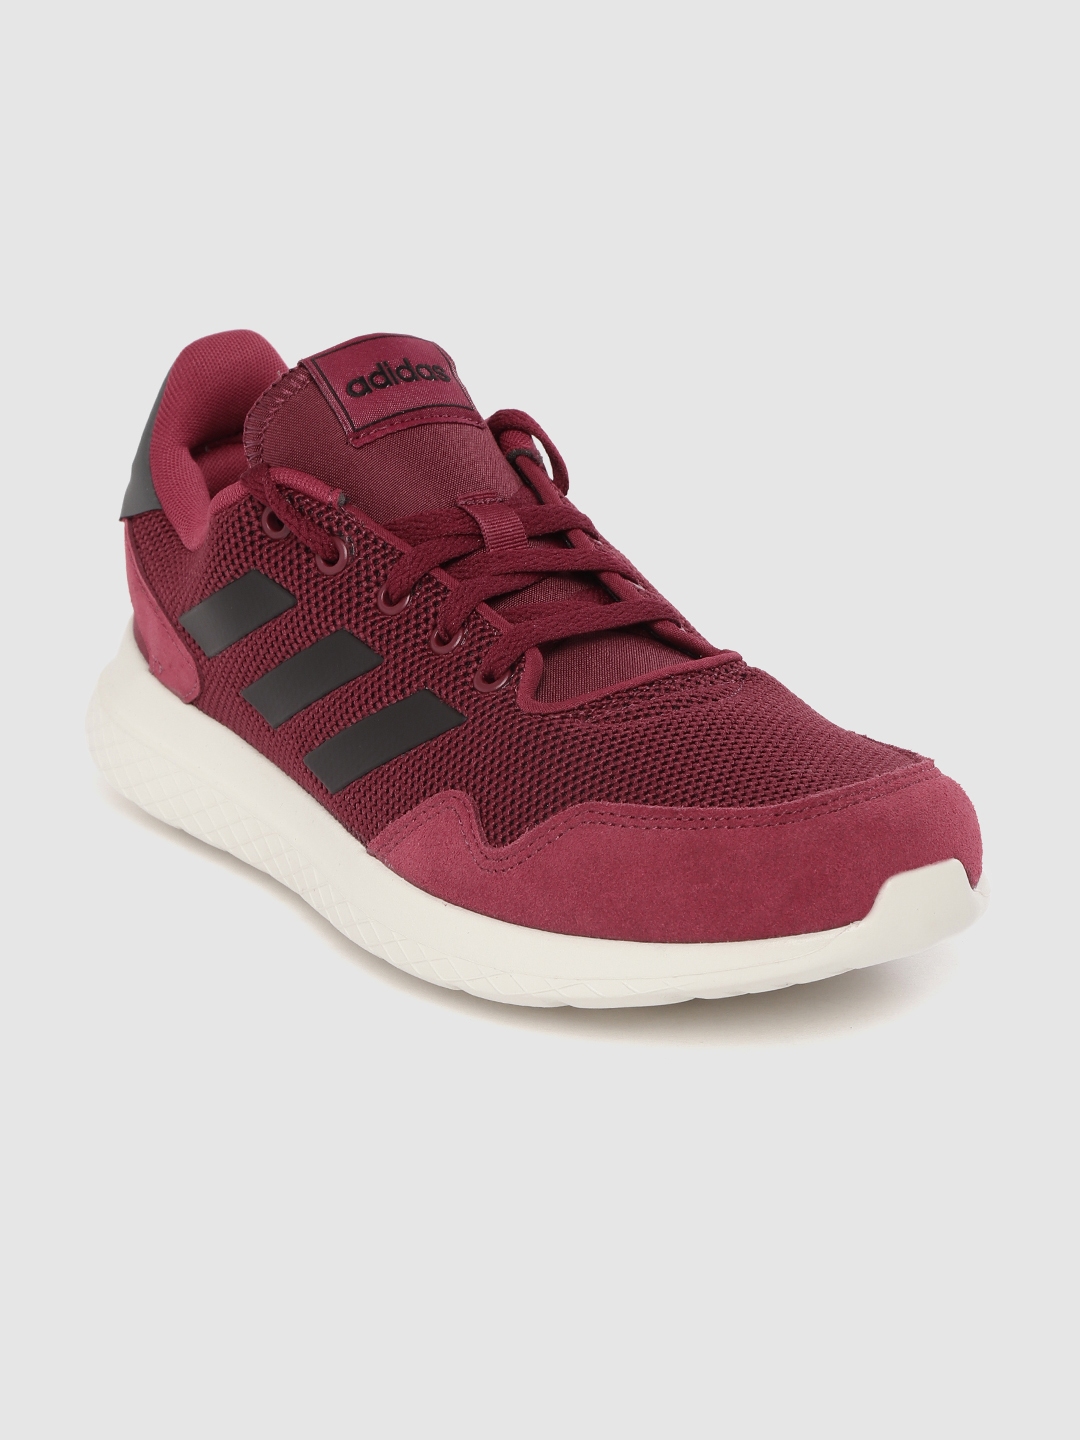 Buy ADIDAS Men Burgundy Woven Design Archivo Sneakers - Casual Shoes ...